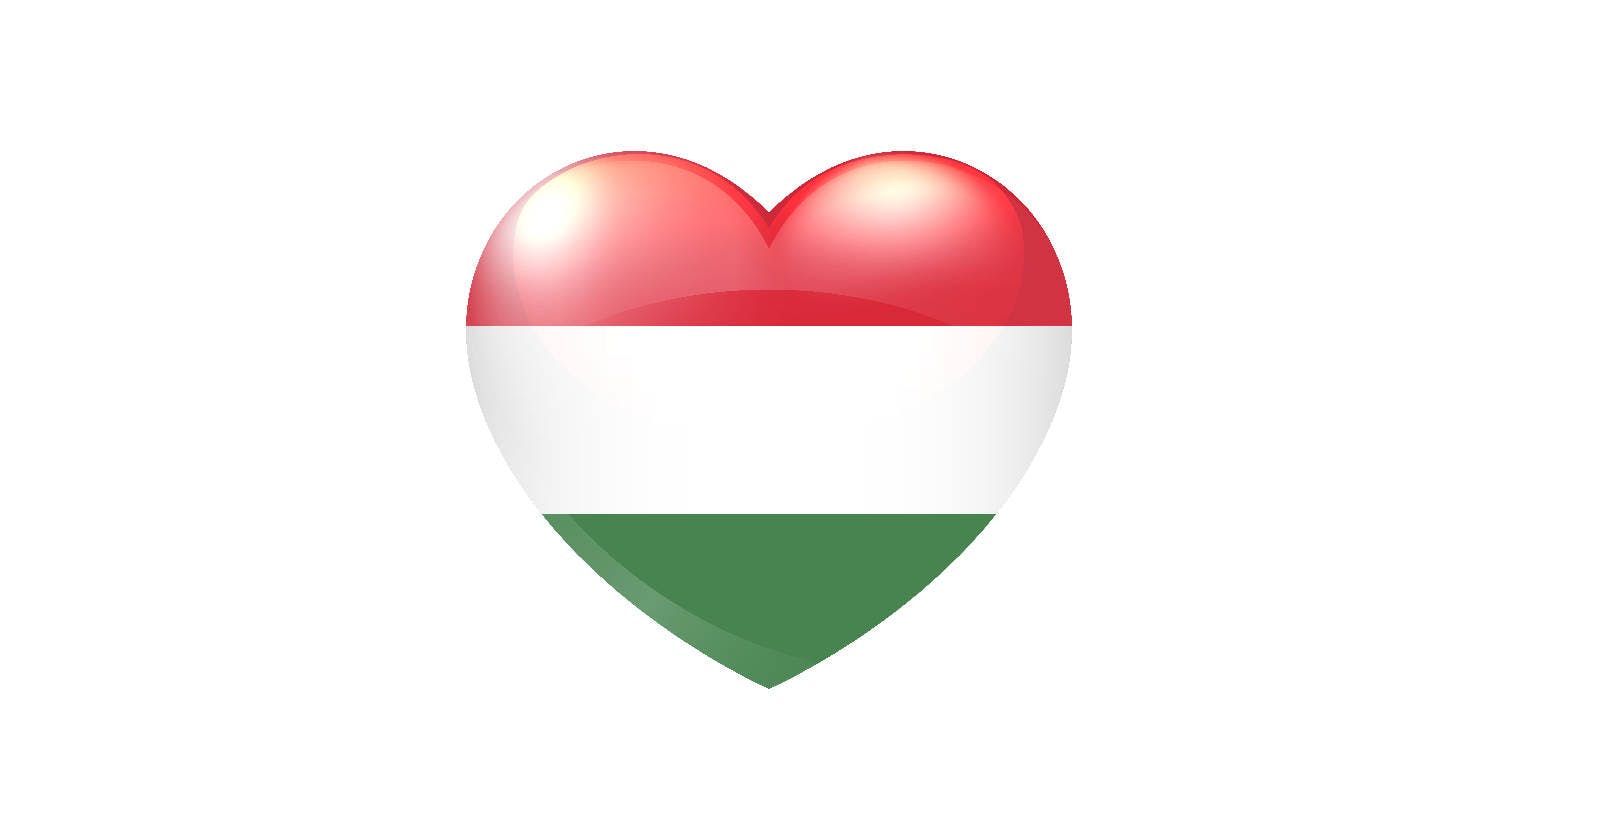 A Brief Introduction To The Hungarian Language 😊